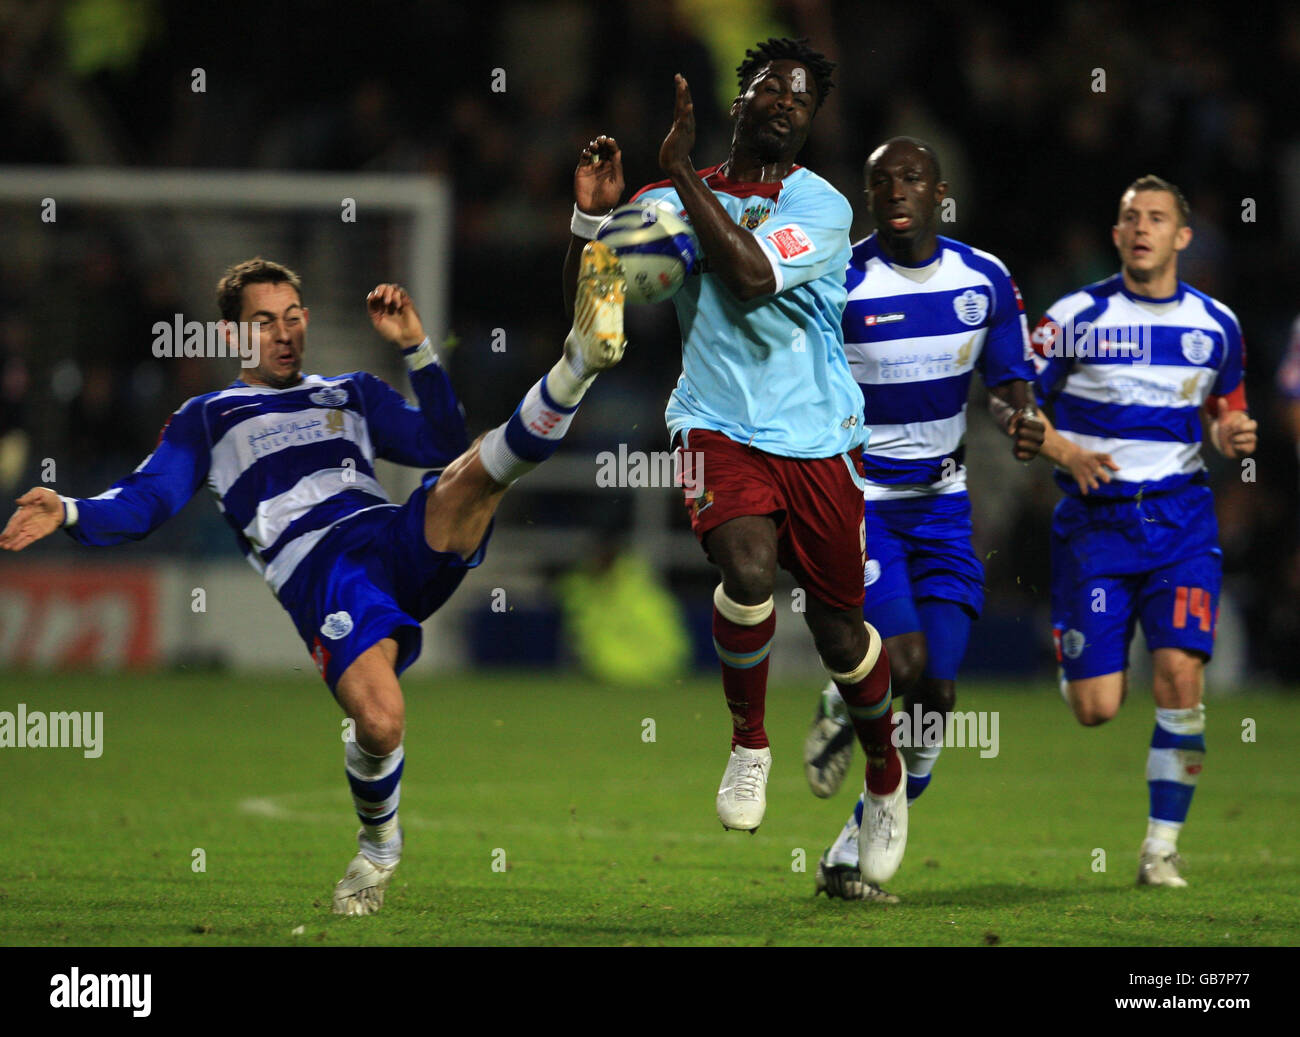 Queens Park Rangers' Lee Cook and Burnley's Ade Akinbiyi battle for the ball during the Coca-Cola Football Championship match at Loftus Road, London. Stock Photo